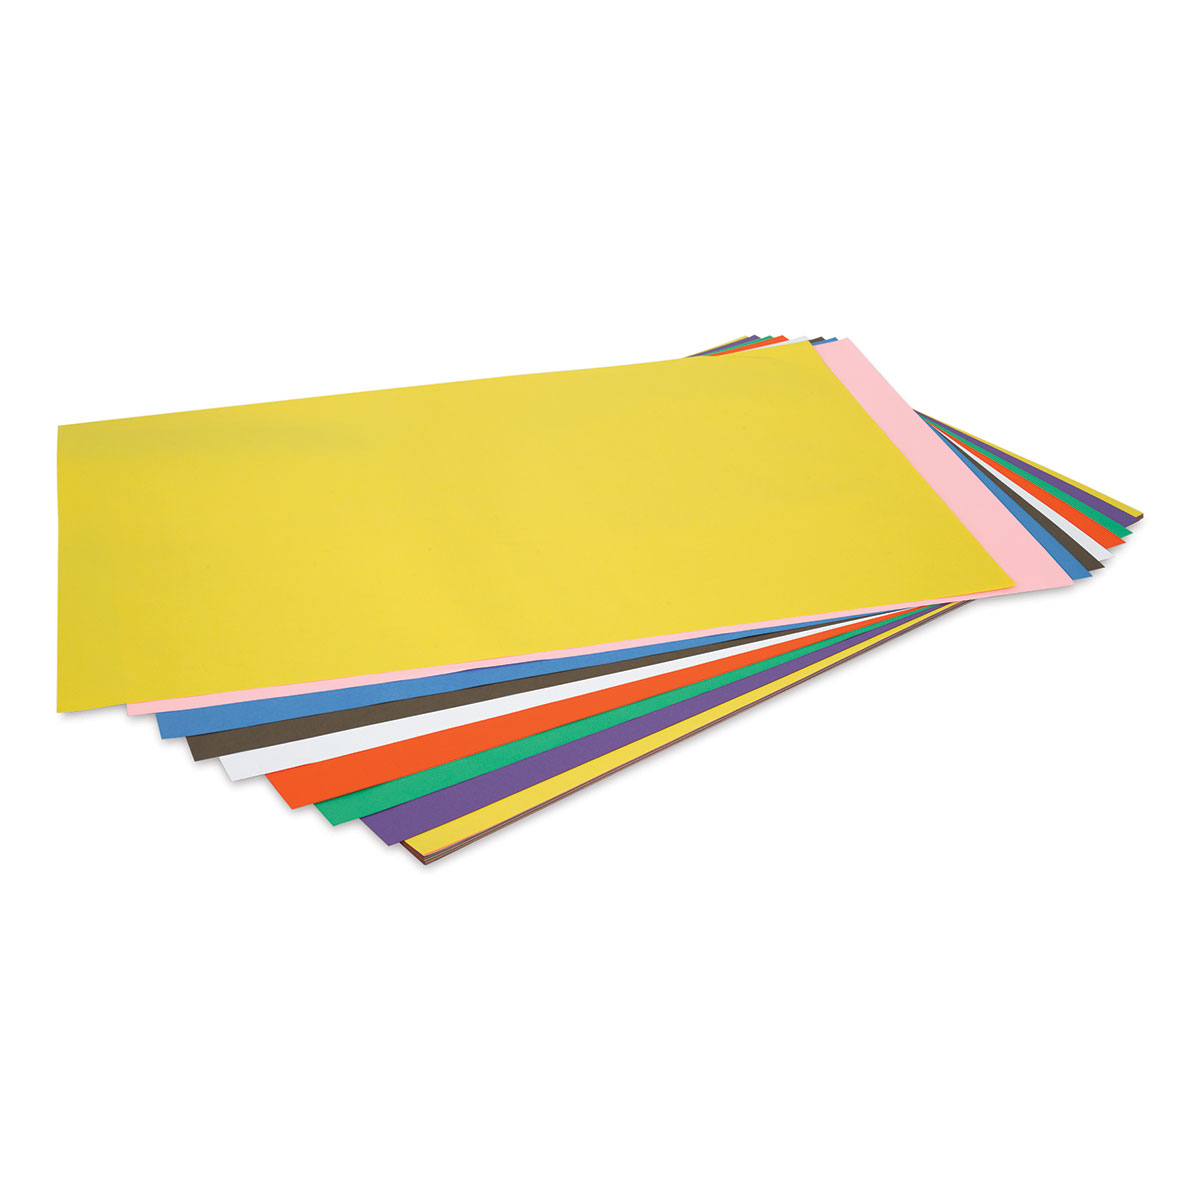 Pacon Tru-Ray Construction Paper - 9 x 12, Assorted Hot Colors, 50 Sheets